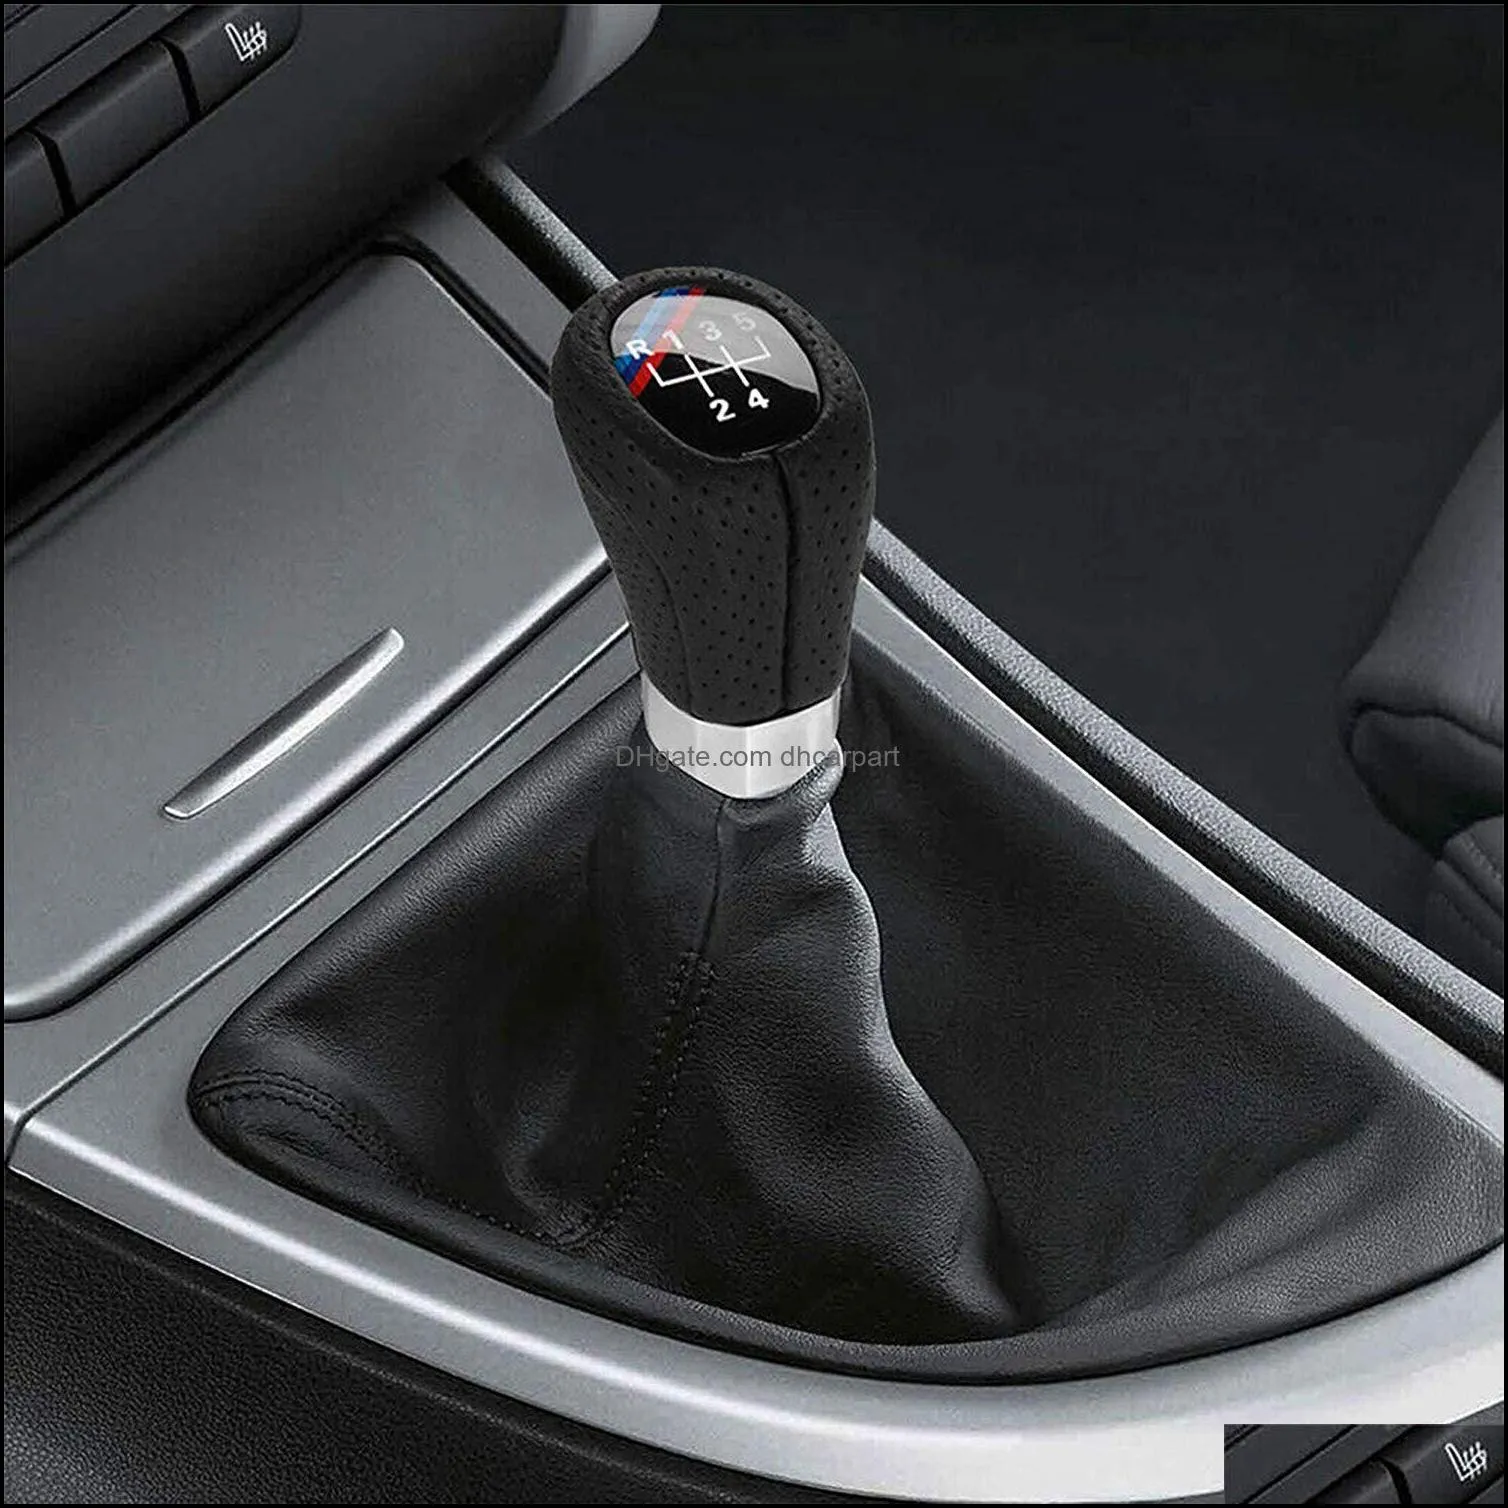 car gear shift knob for bmw 3 5 6 e36 e39 e46 e60 e87 e90 e91 e92 5/6 speed shifter lever stick